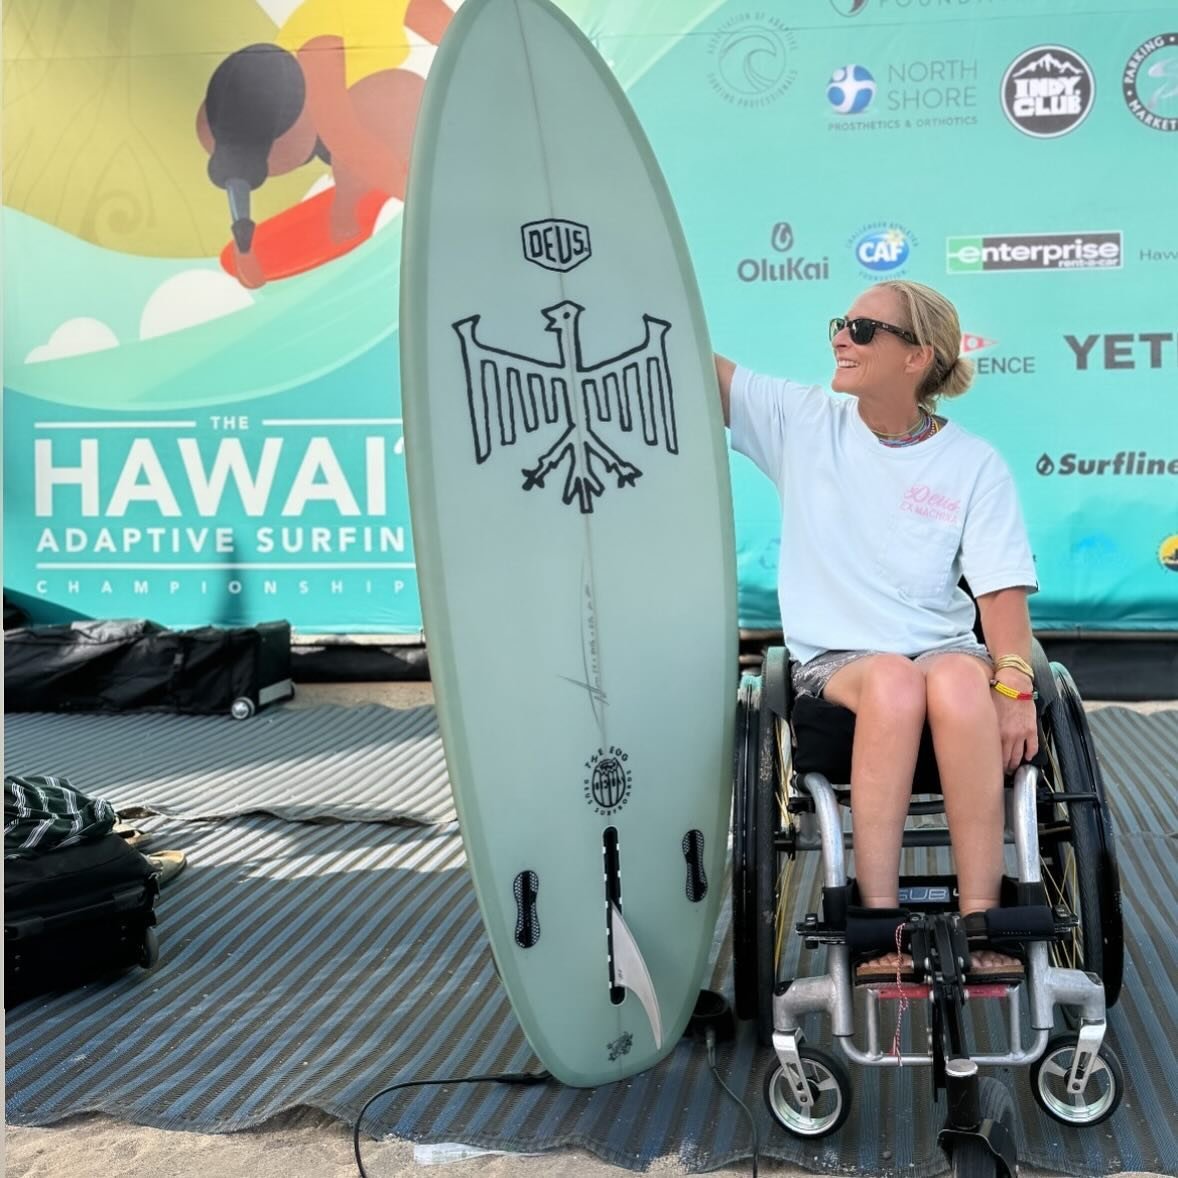 Good luck to our friend and previous IWD guest speaker @samjbloom who is competing  in the Hawaii Adaptive Surfing Championship, starting tomorrow 🤩